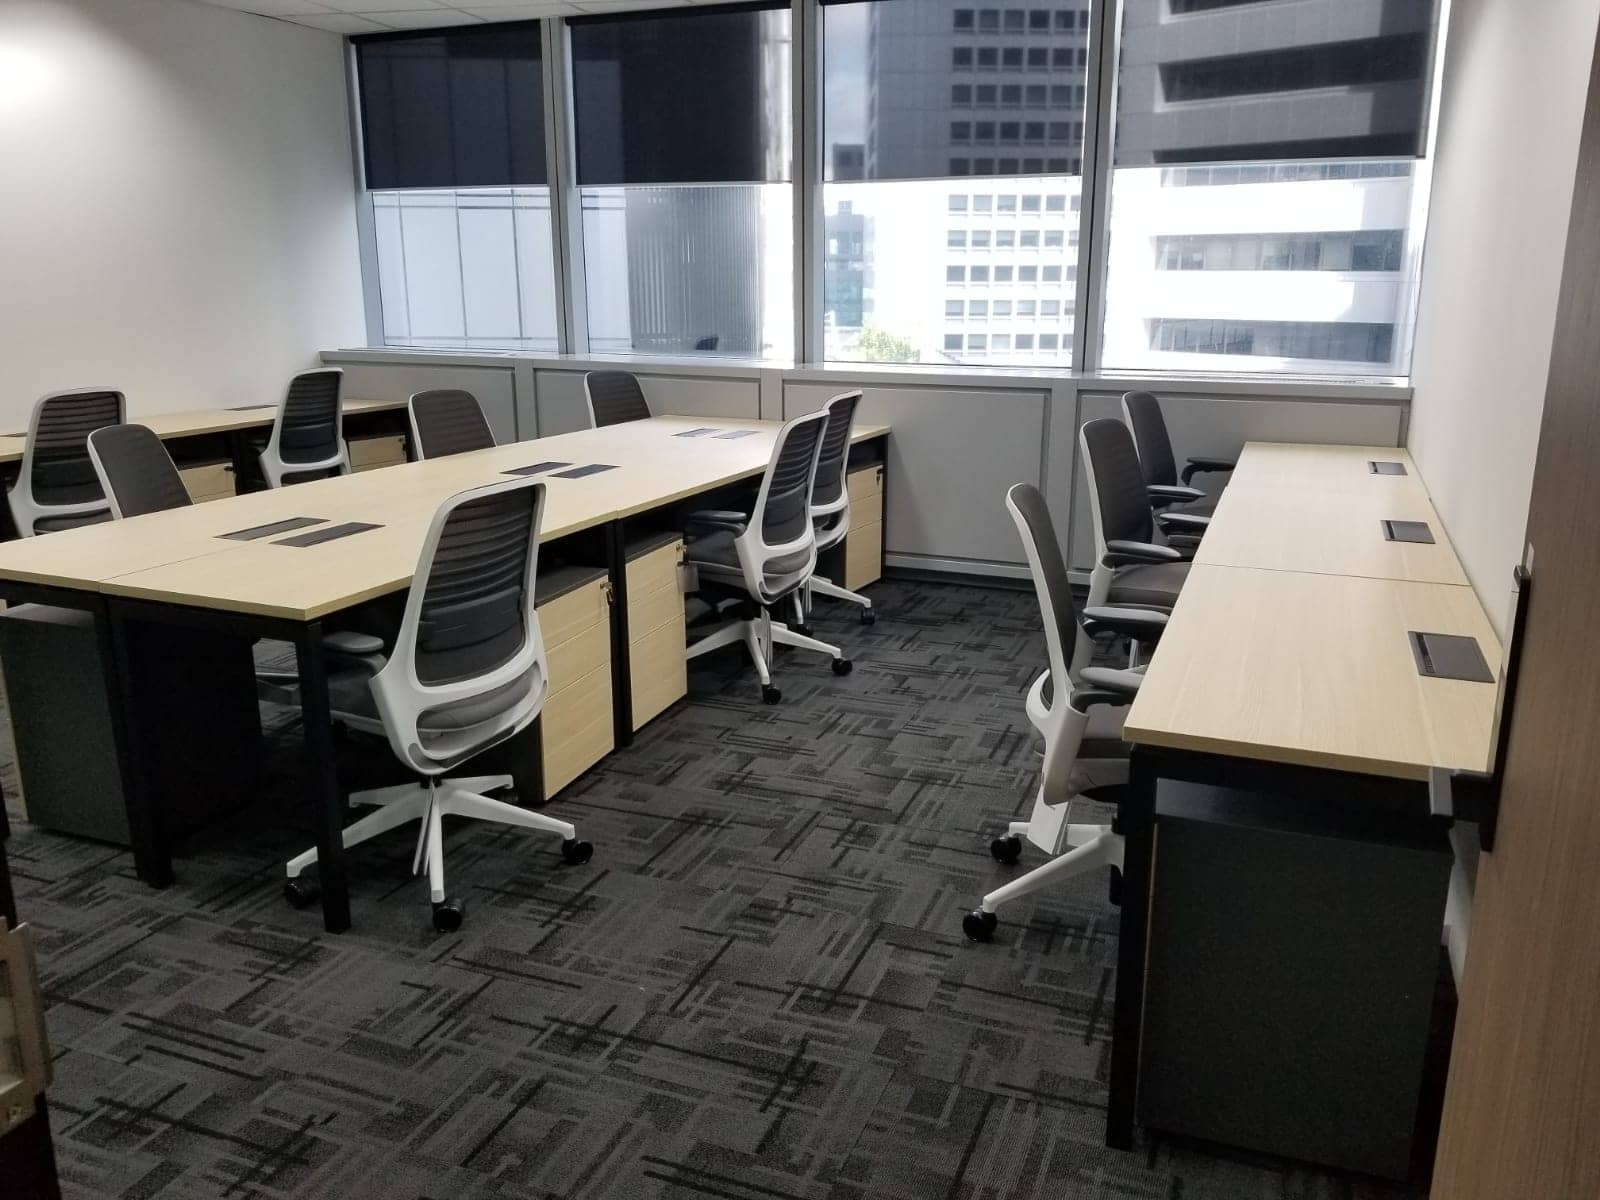 Serviced offices, private offices, coworking spaces at 16 collyer quay singapore